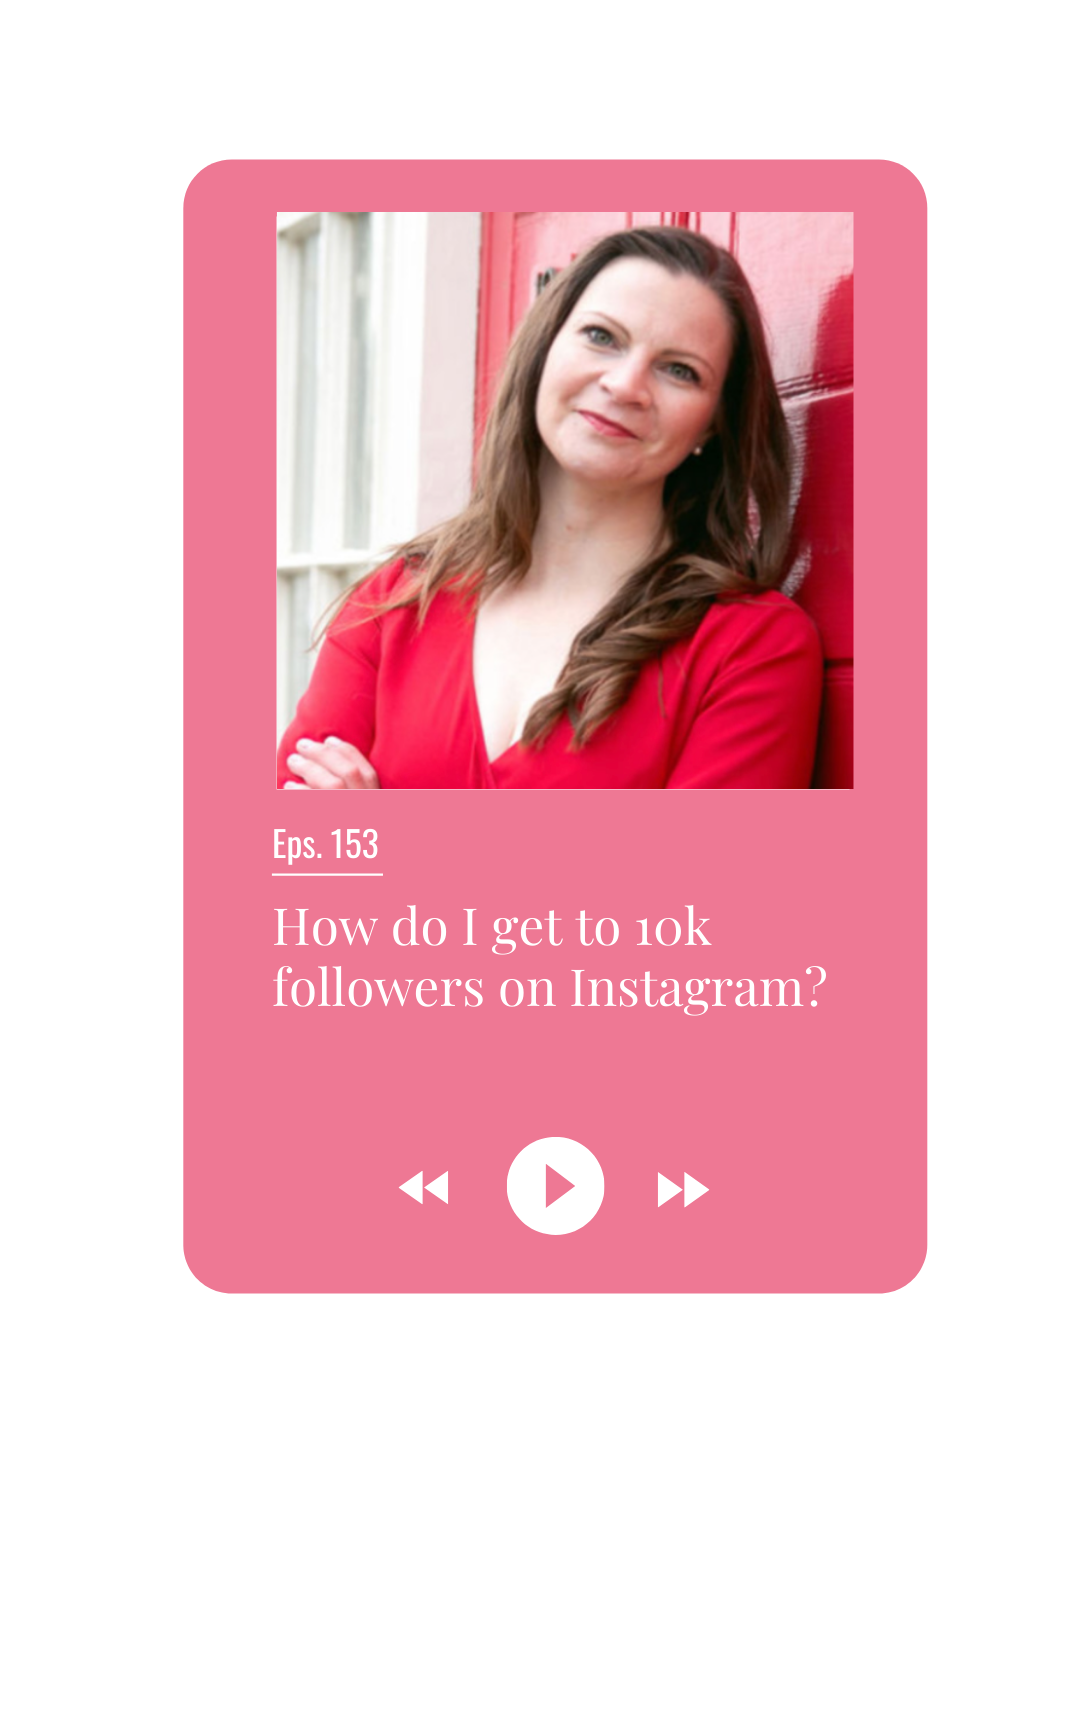 How to get to 10k followers on Instagram